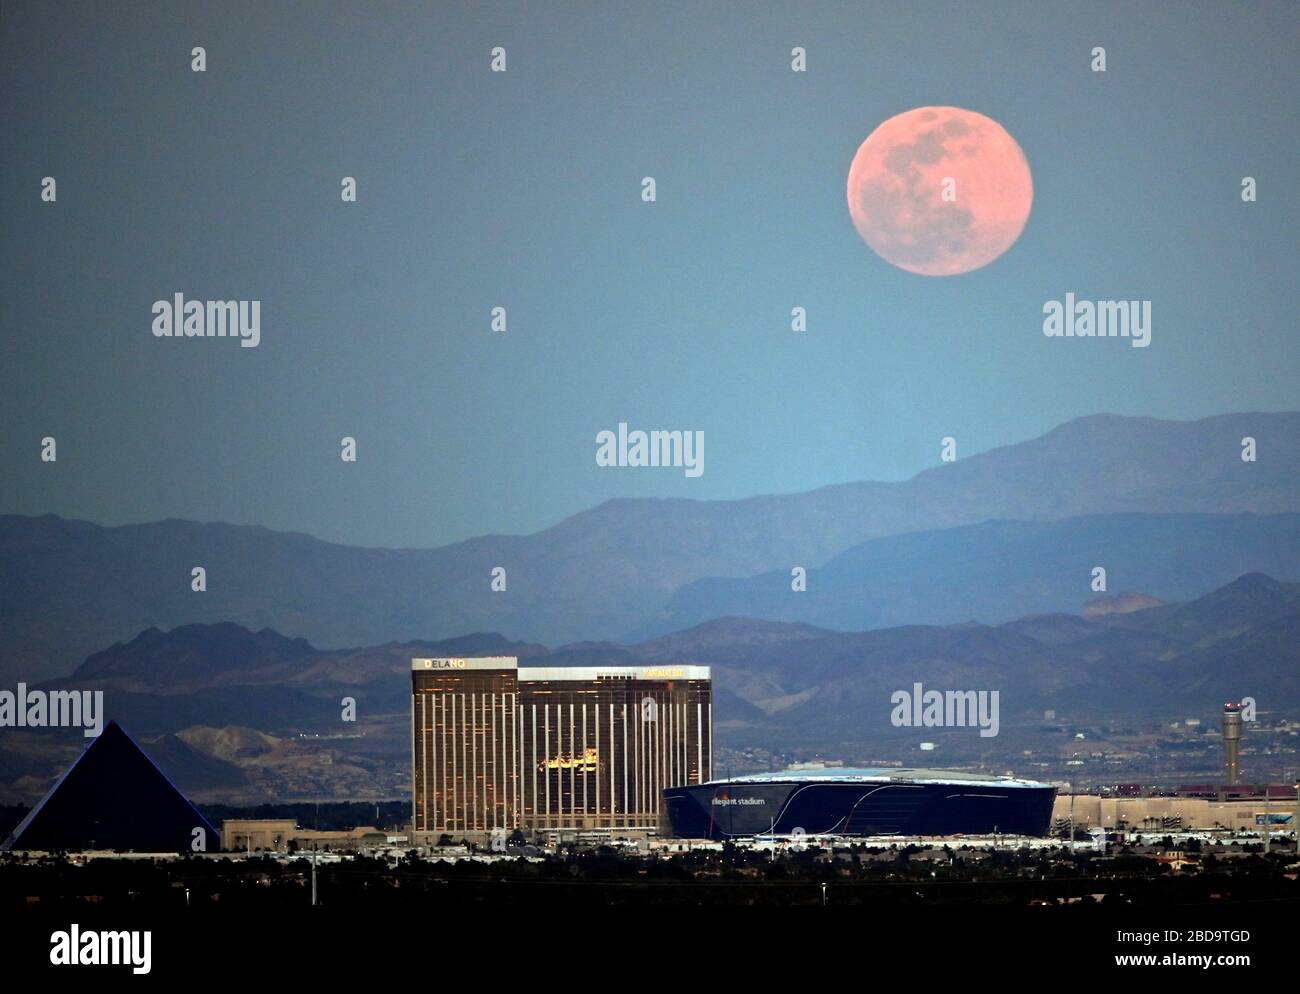 Las Vegas, Nevada, USA. 7th Apr, 2020. The super pink moon, the biggest supermoon of the year, rises over (L-R) Luxor Hotel and Casino, Delano Las Vegas at Mandalay Bay Resort and Casino, Mandalay Bay Resort and Casino and the under construction Allegiant Stadium on April 7, 2020 in Las Vegas, Nevada. The pink moon got its name because the April full moon occurs at the same time as the pink wildflower Phlox subulata blooms in North America. A supermoon occurs when a full moon coincides with its perigee, which is its closest approach to the Earth. Credit: David Becker/ZUMA Wire/Alamy Live News Stock Photo